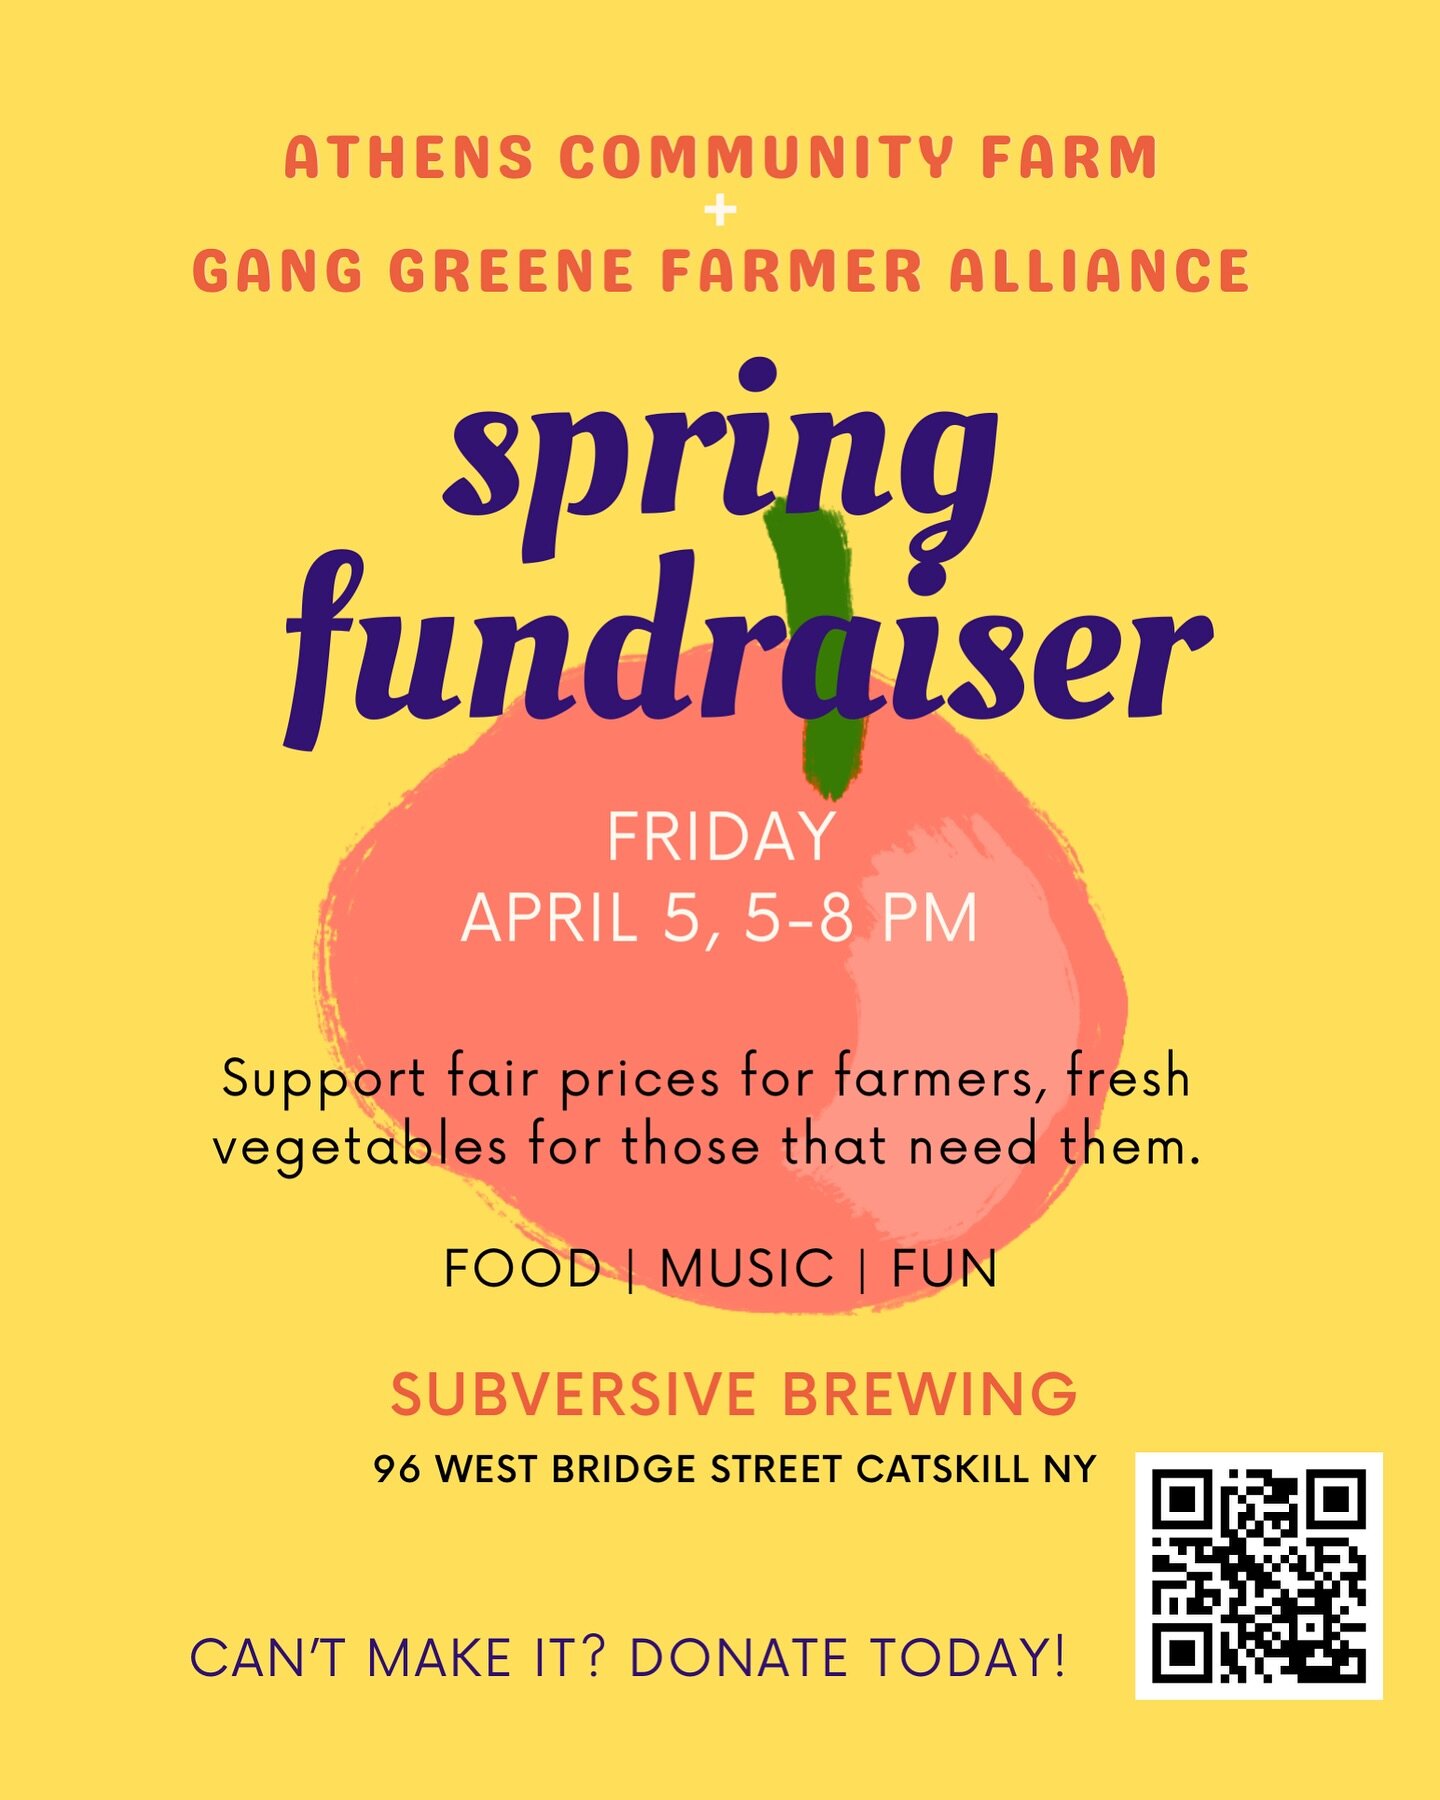 JOIN US FOR OUR SECOND ANNUAL COMMUNITY SHARES FUNDRAISER THIS FRIDAY, APRIL 5! 👨&zwj;🌾🪴

We&rsquo;ll be hosting our Second Annual Fundraiser for @athenscommunityfarm &amp; @ganggreenefarmeralliance this Friday, April 5 from 5-8 PM!

The Community